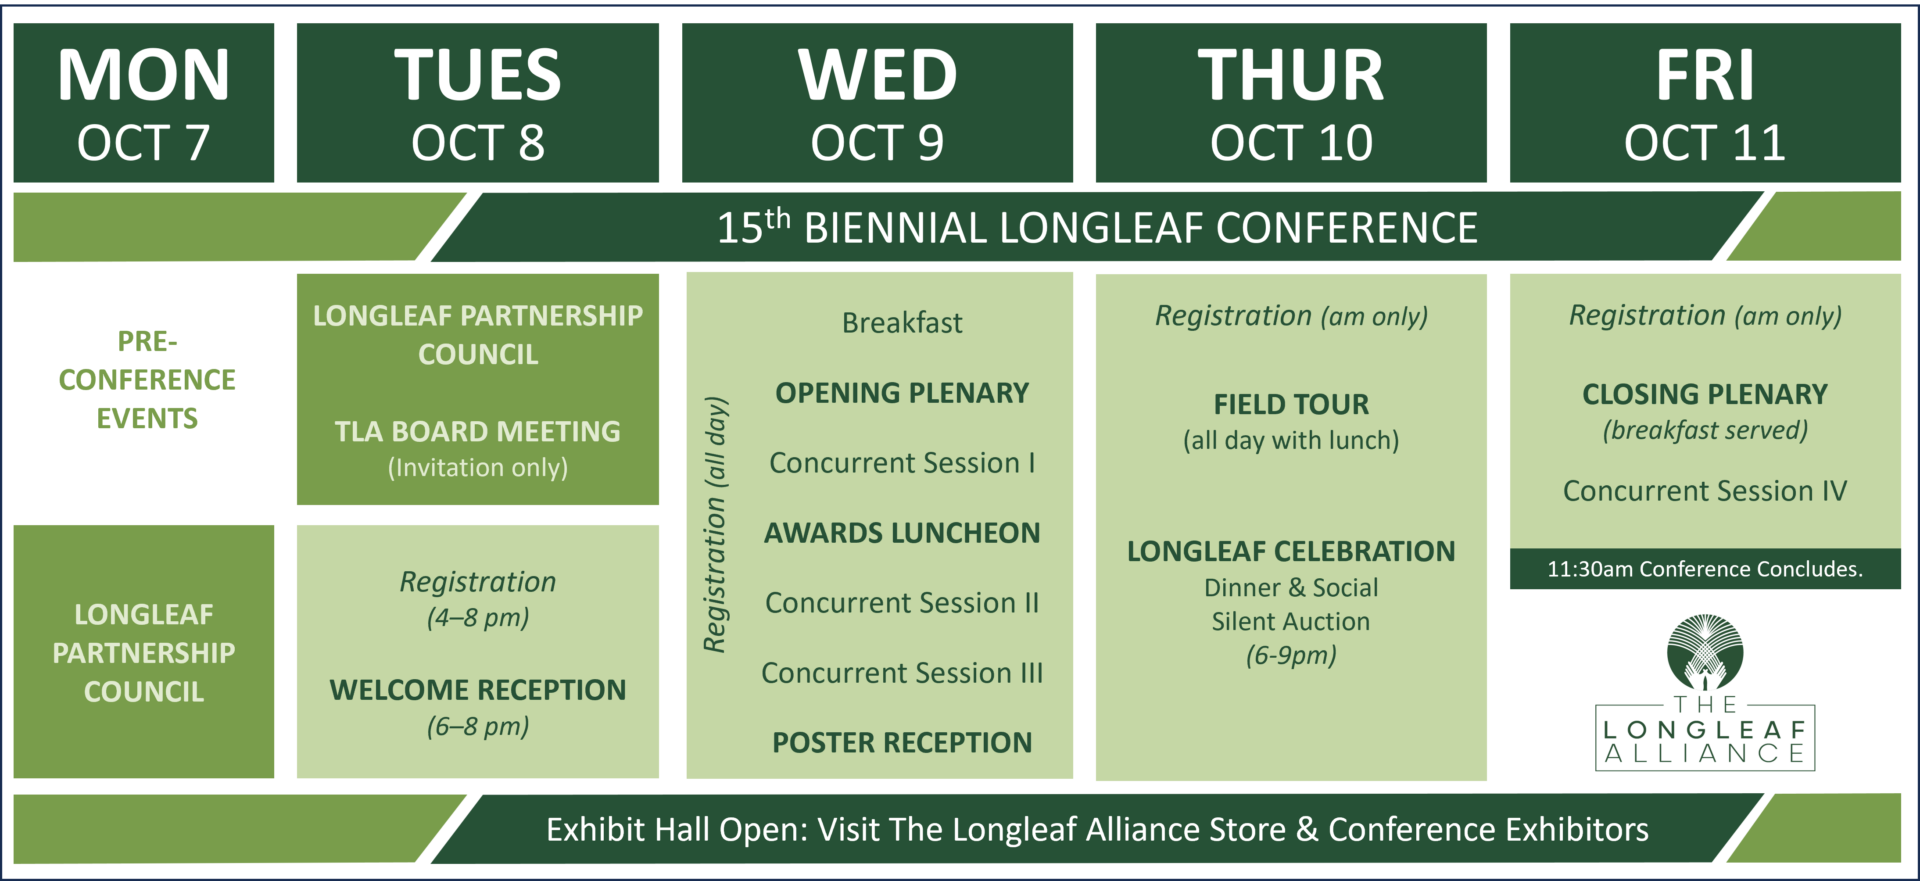 Conference Schedule *Details subject to change*